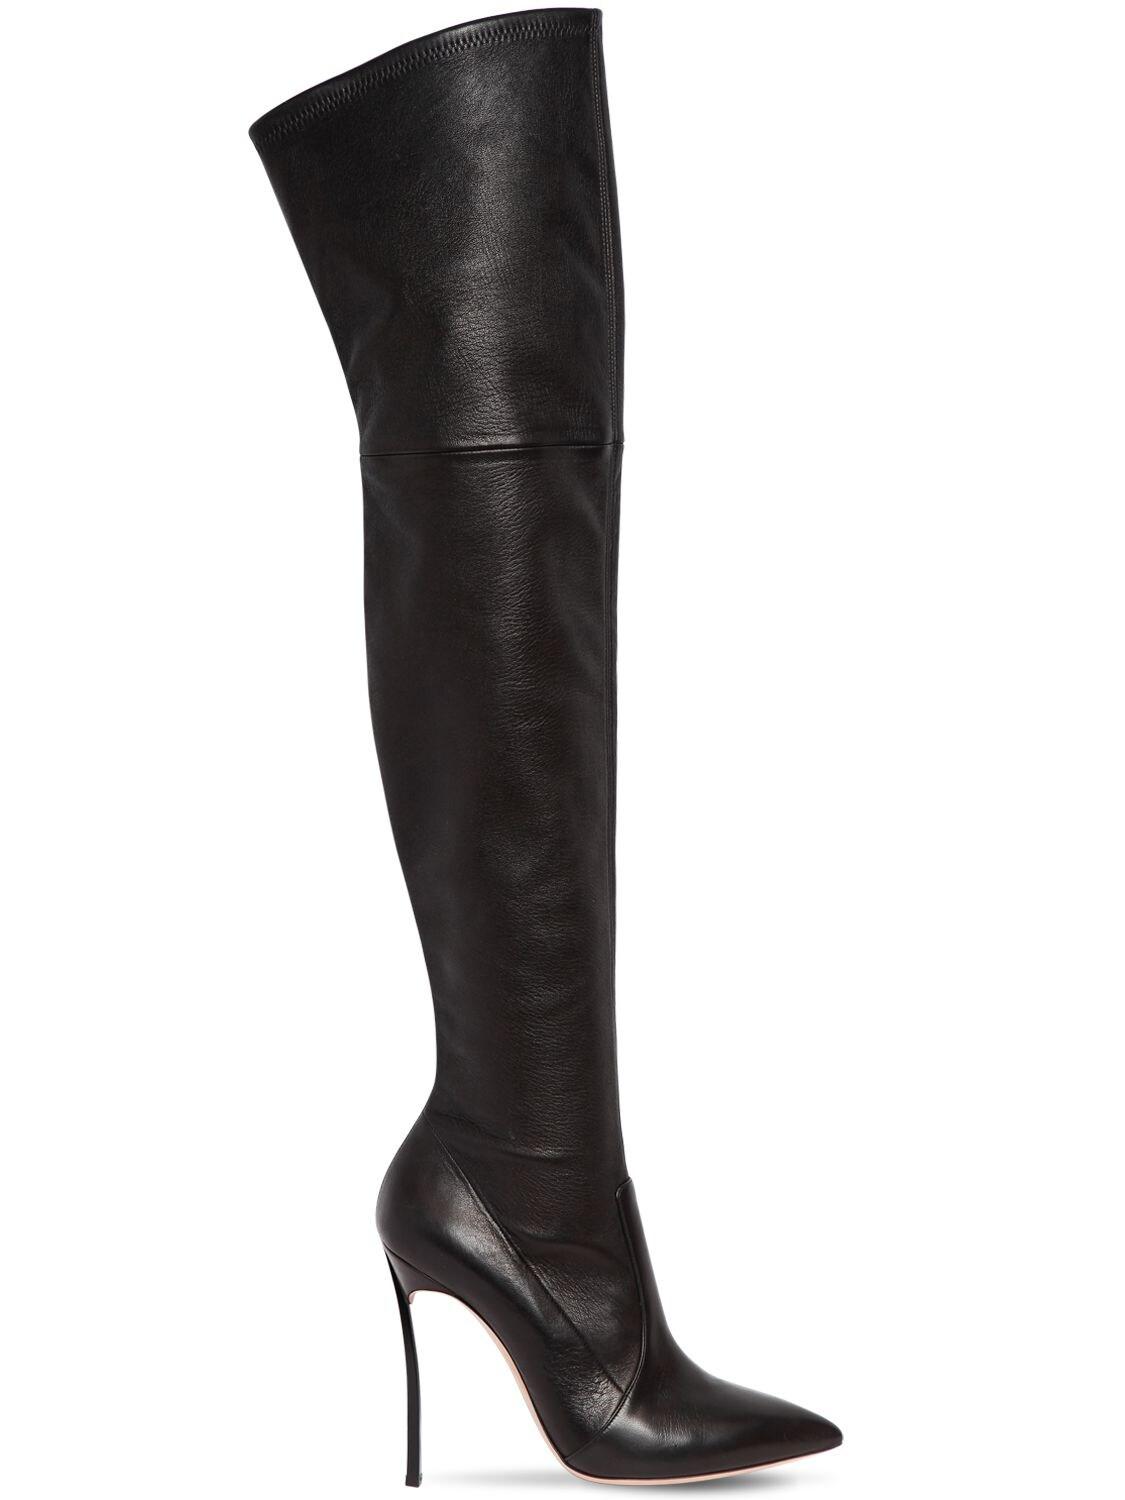 Casadei 100mm Blade Stretch Nappa Leather Boots in Black - Lyst